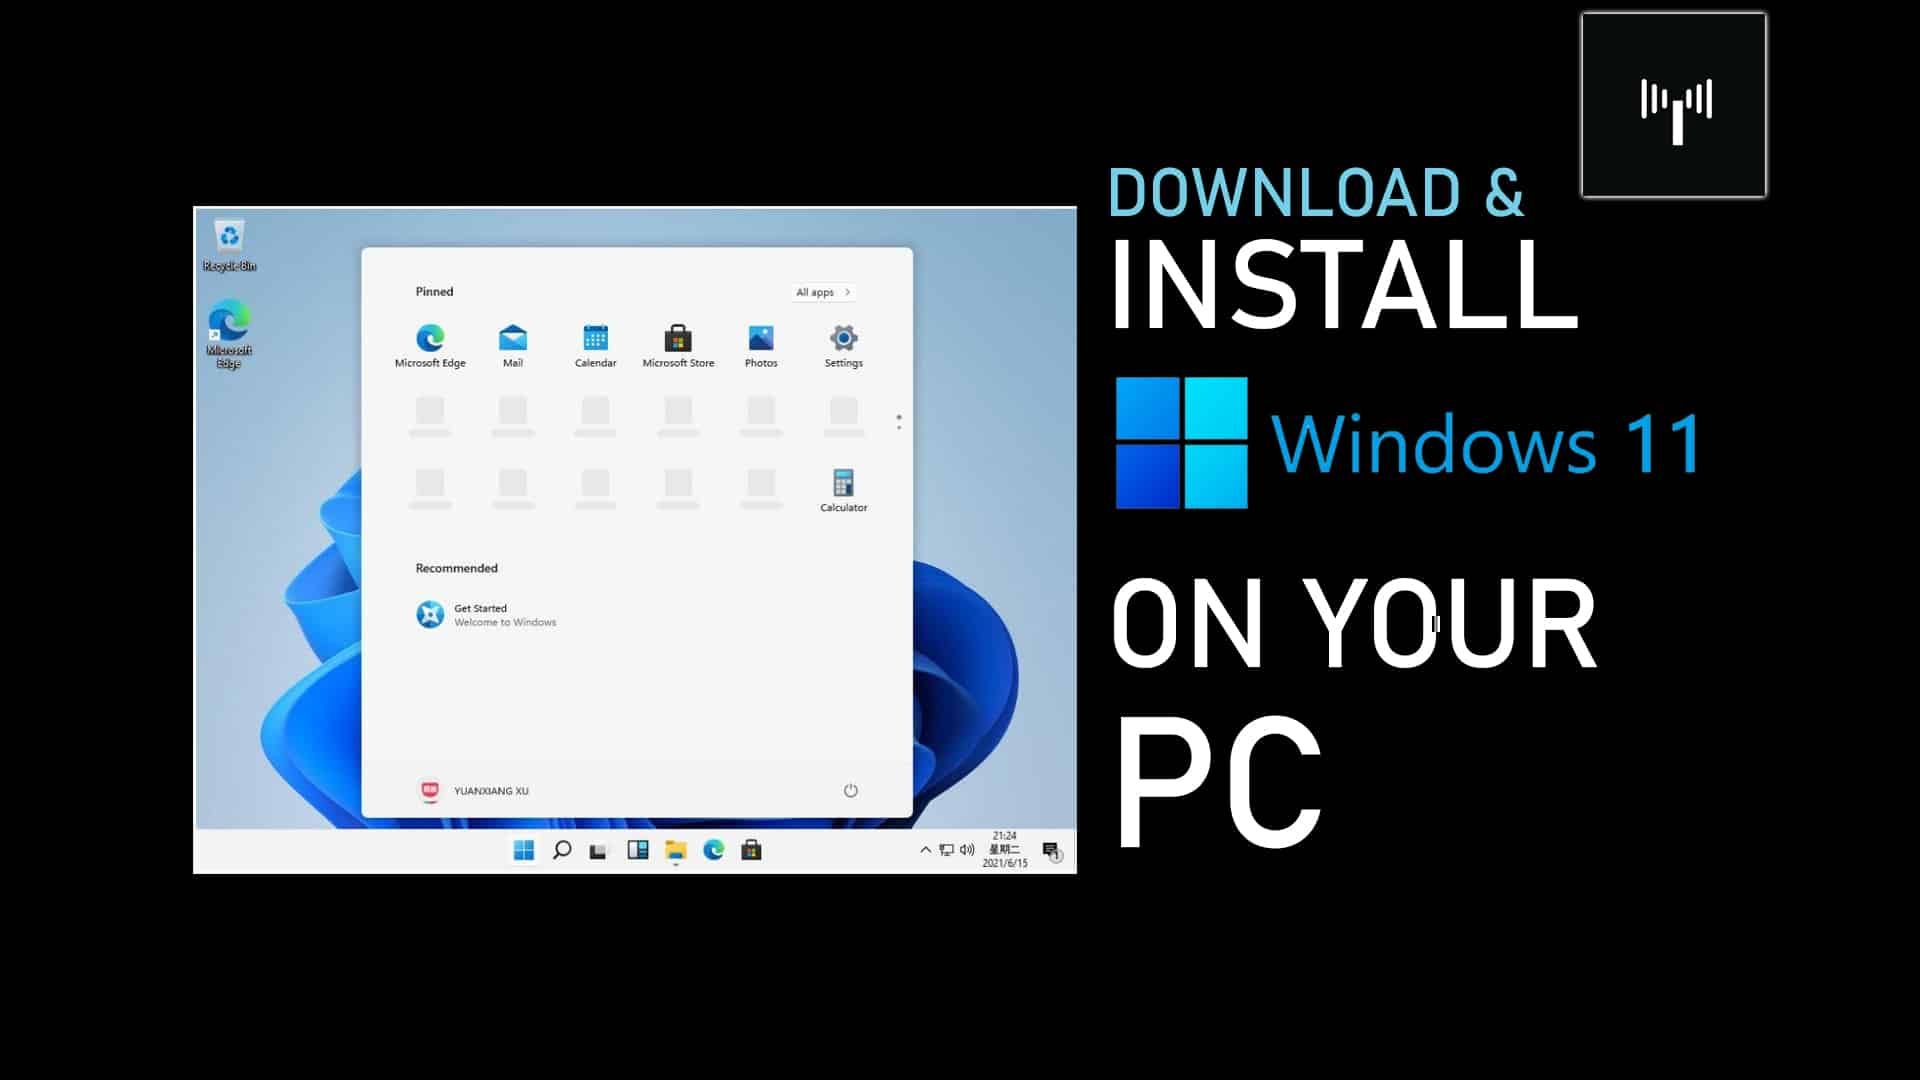 How to download and install Windows 11 legally